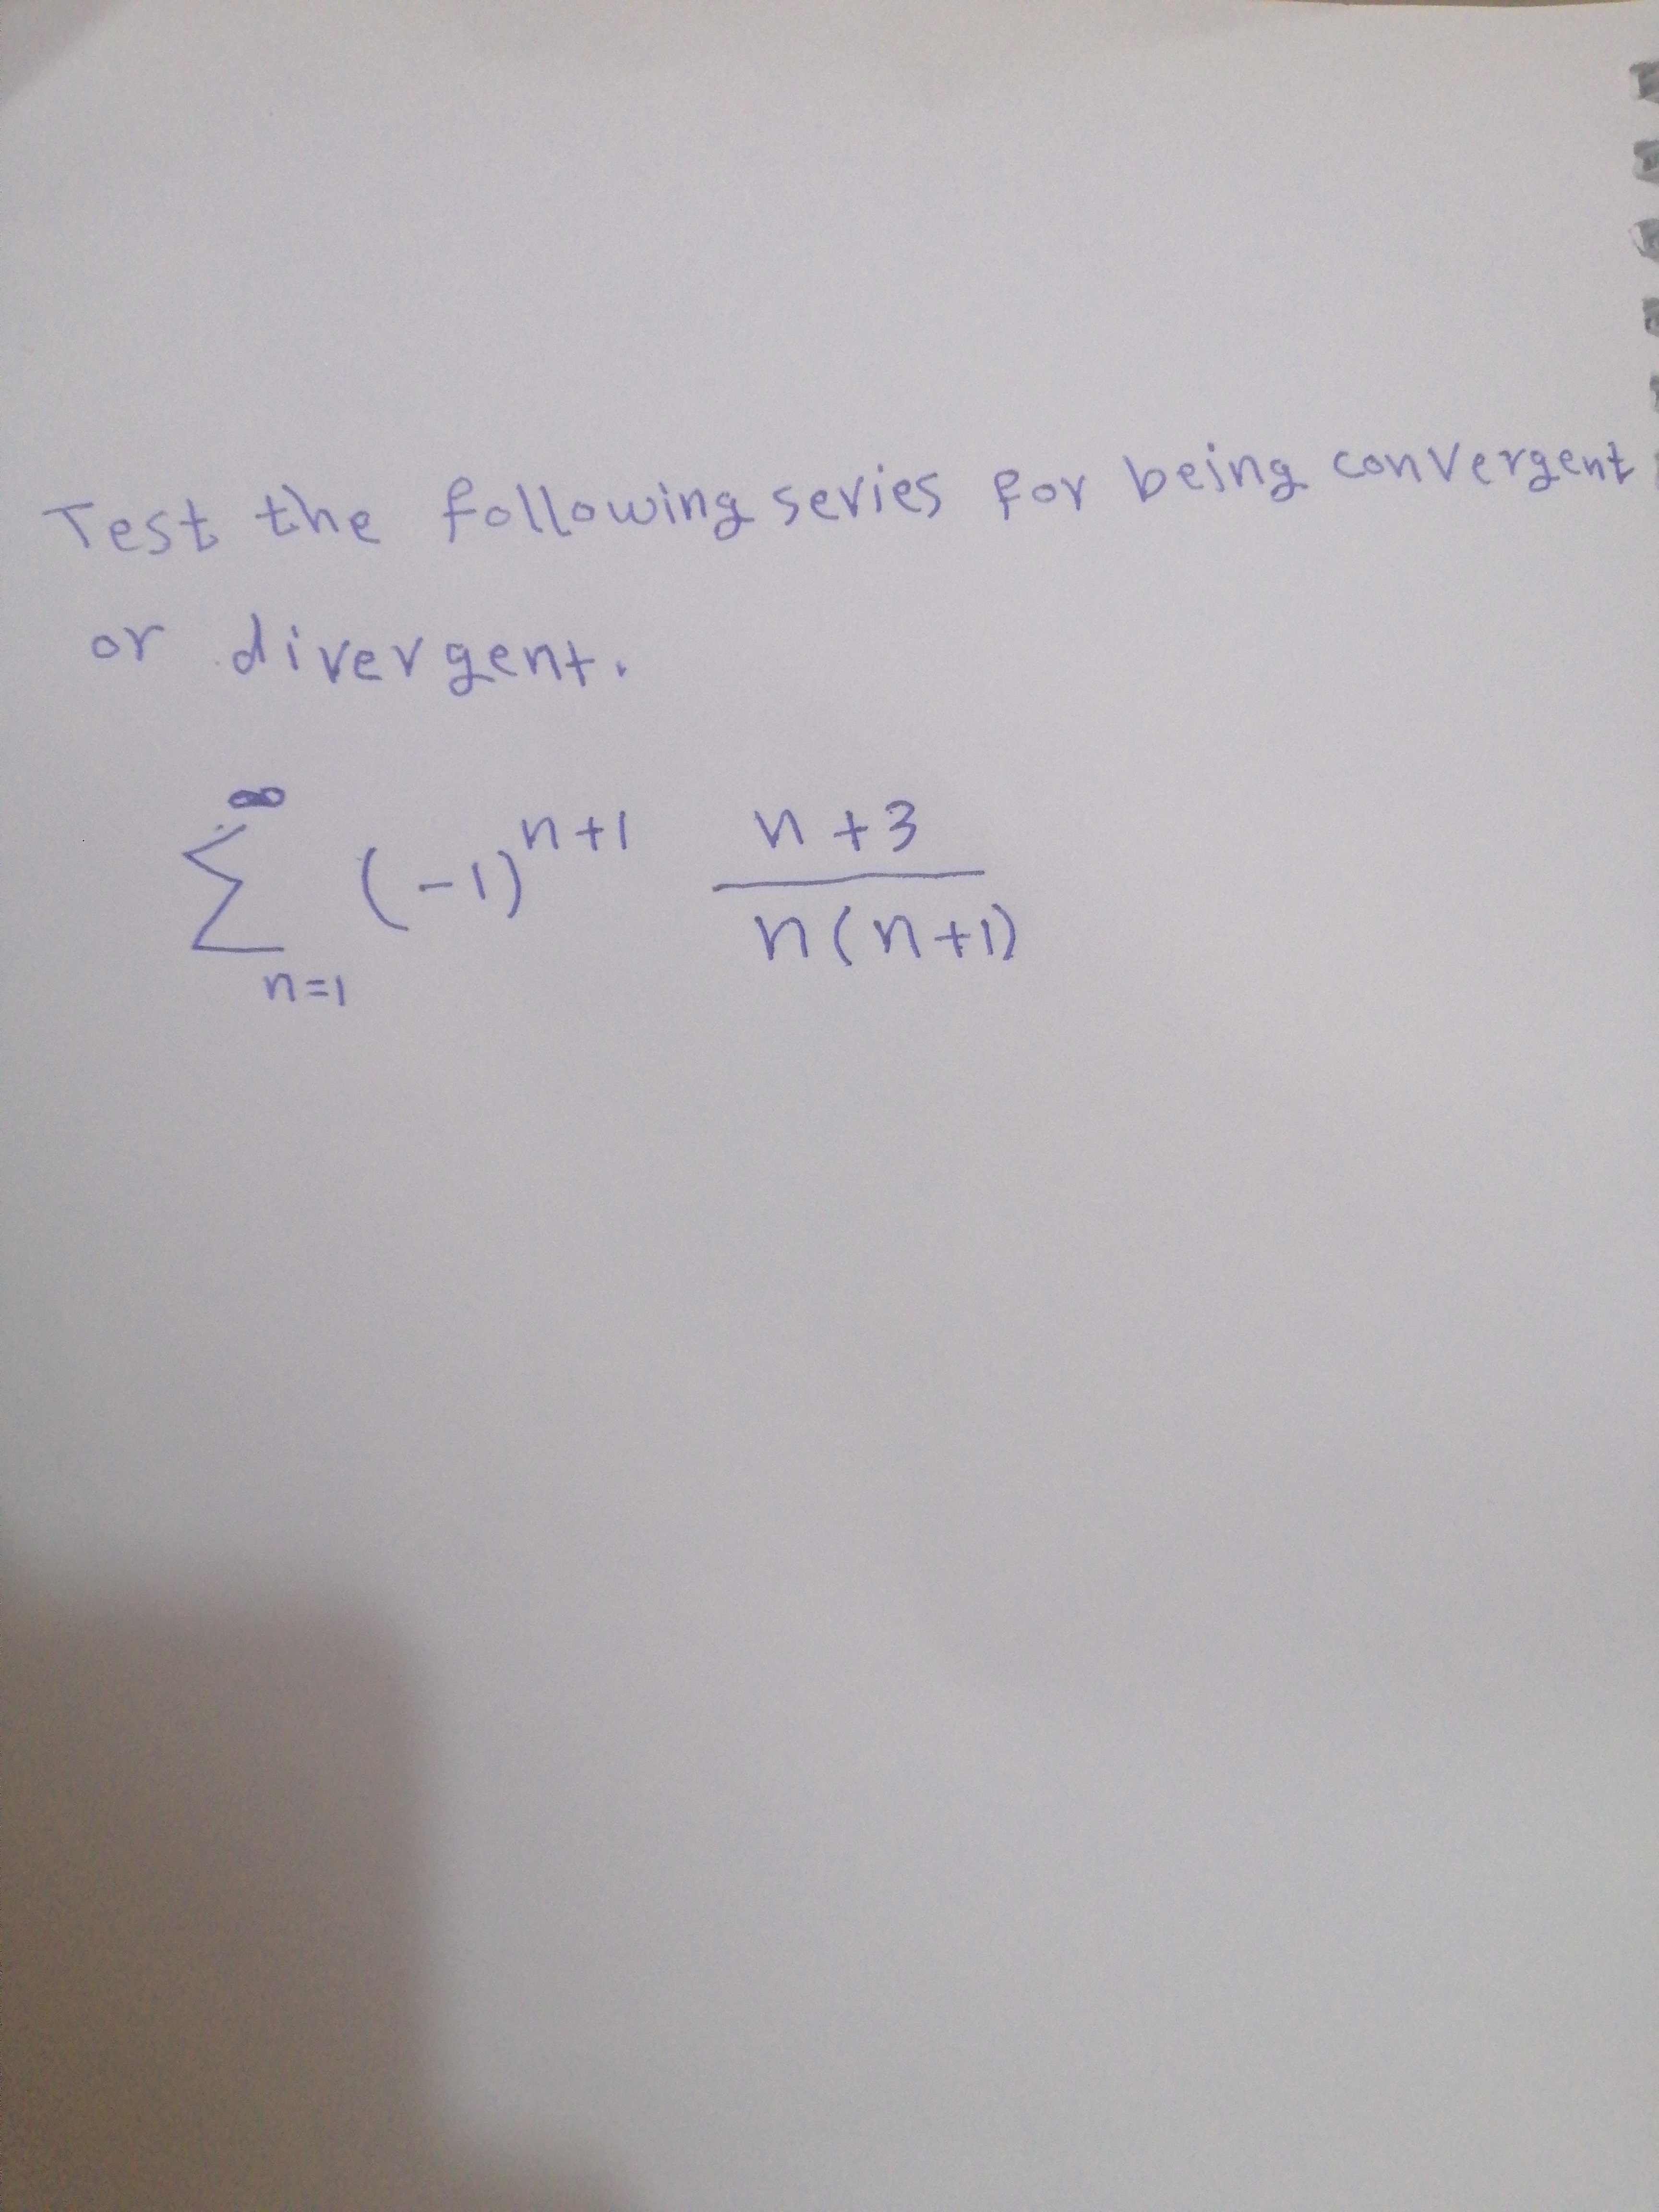 Test the following sevies Por being convergent
or divergent.
n+3
s (-リt)
(-1)
n(nt1)
